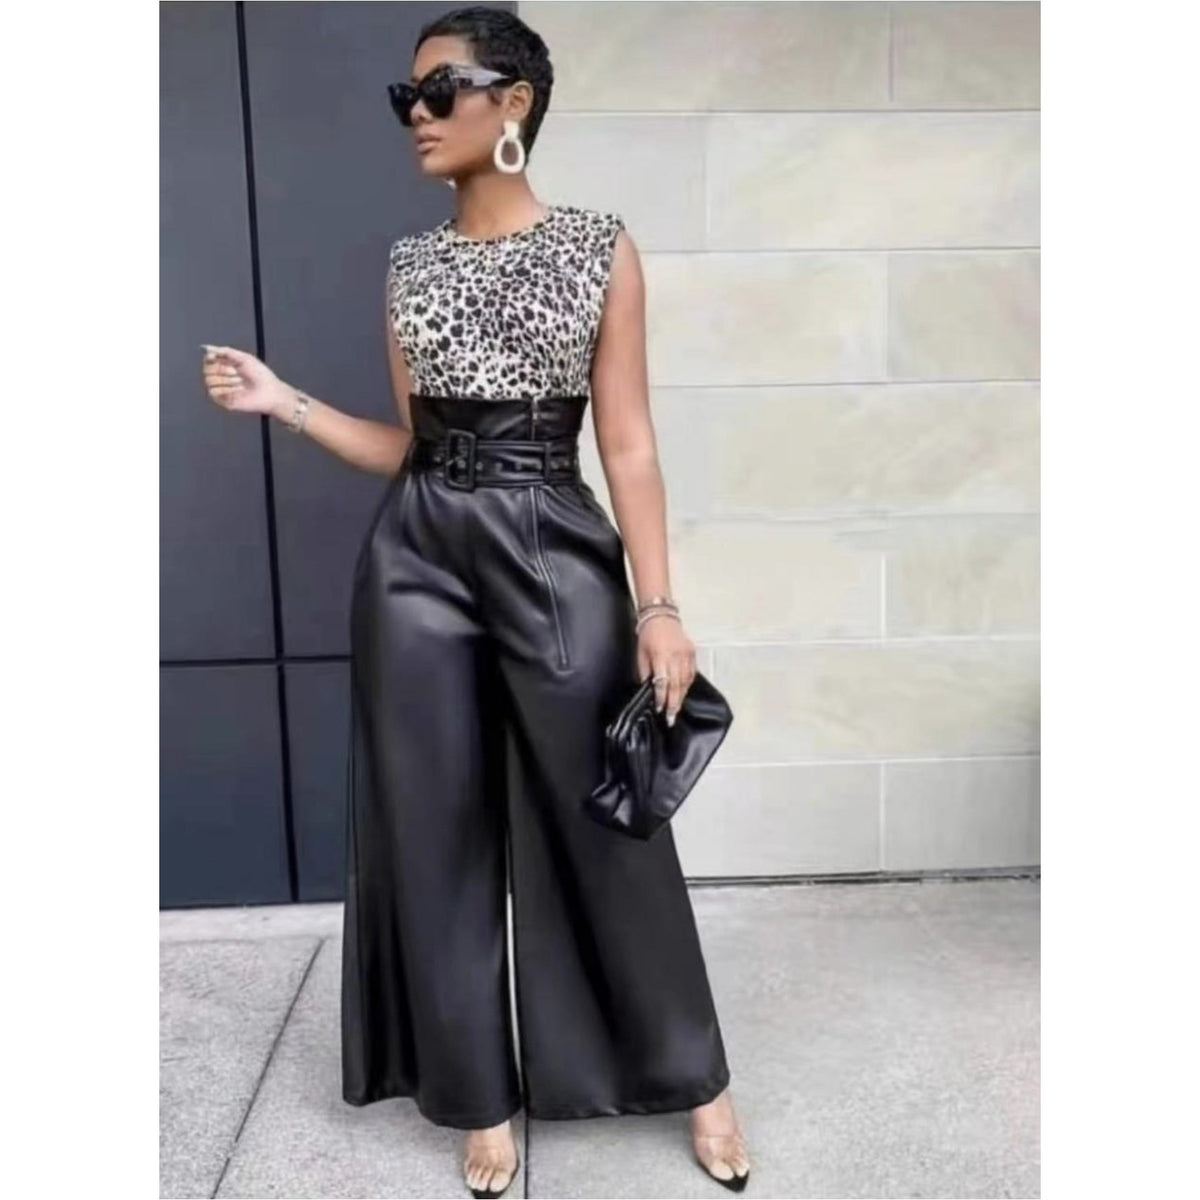 Floral Letter Print Two Piece High Waisted Palazzo Pants Set Full Sleeve  Basic Blouse And Wide Leg Trouser For Business And Formal Wear From  Blueberry12, $23.53 | DHgate.Com